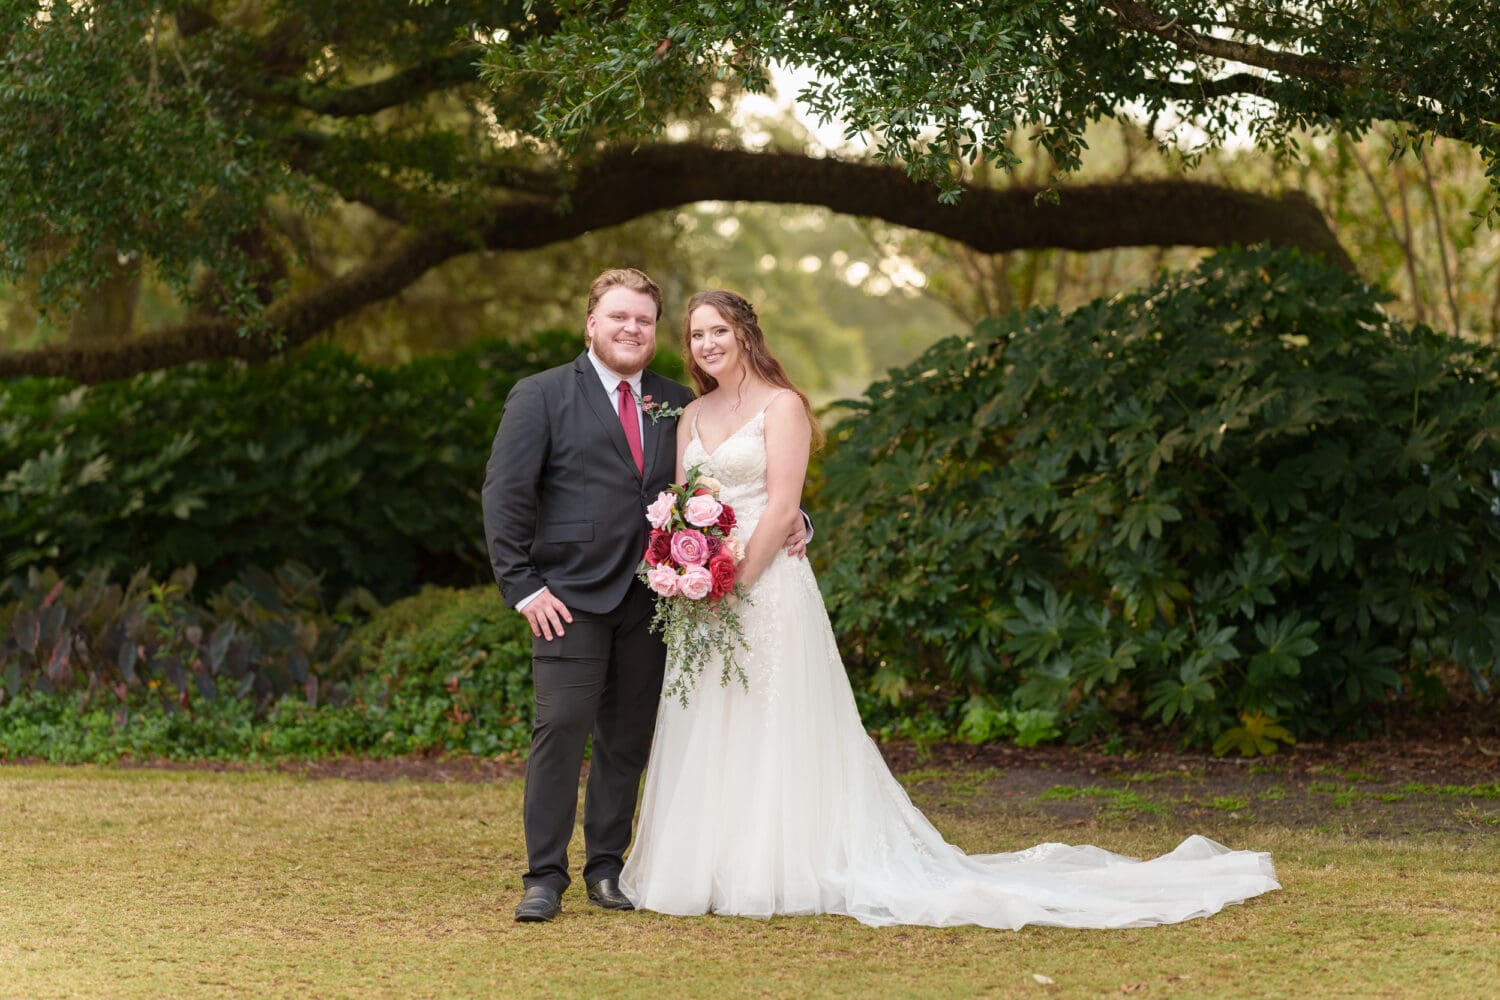 Portraits of the bride and groom - Litchfield Country Club